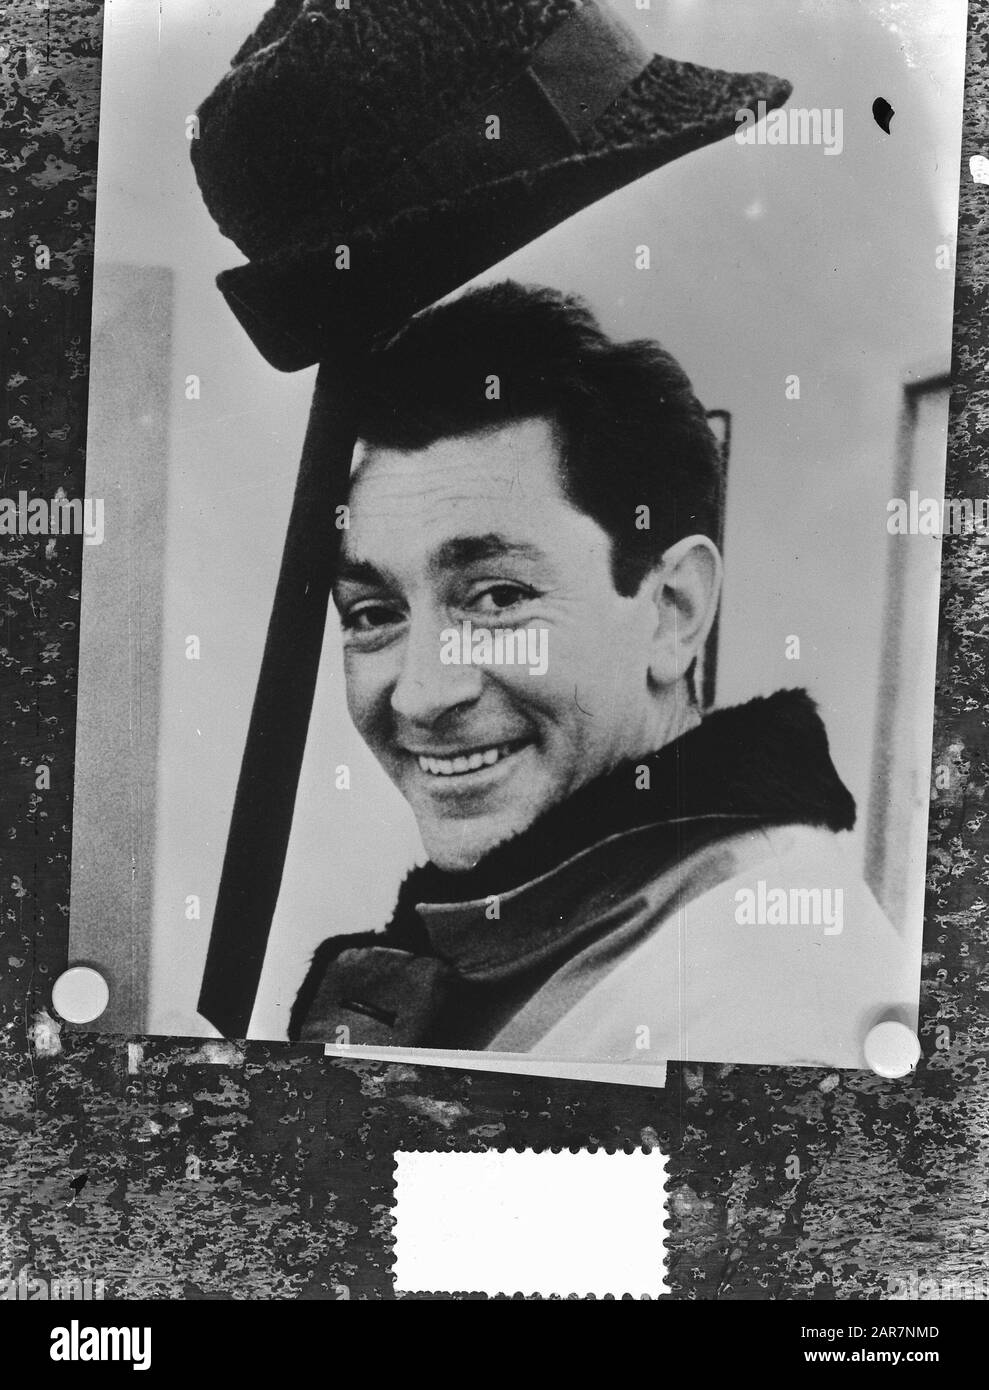 Jean-Claude Pascal (Luxembourg), winner of the 1961 Eurovision Song Contest  in Cannes Date: 19 March 1961 Location: Luxembourg Keywords: artists,  music, portraits, song festivals Personal name: Pascal Jean-Claude Stock  Photo - Alamy